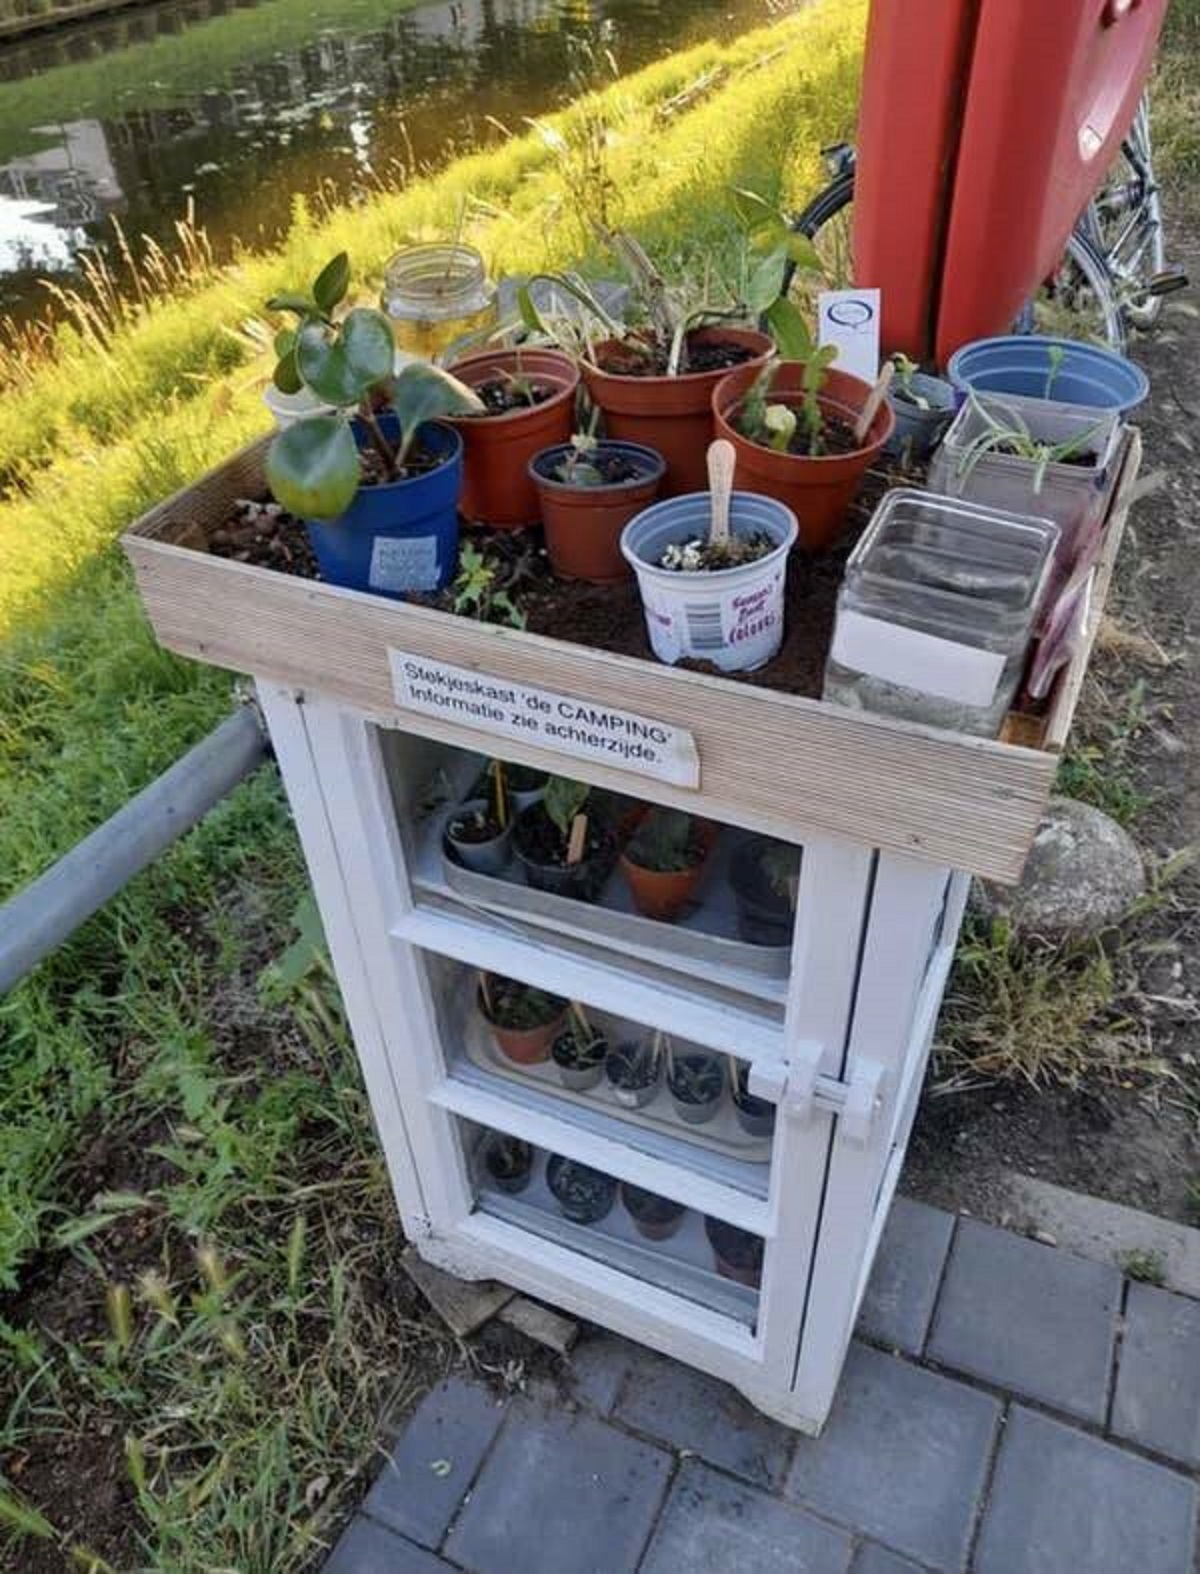 Apparently there are "plant libraries" in the Netherlands where you can get free propagations or trade plants...or drop plants off to go to better homes, if you're like me and can't keep a plant alive if your own life depended on it.